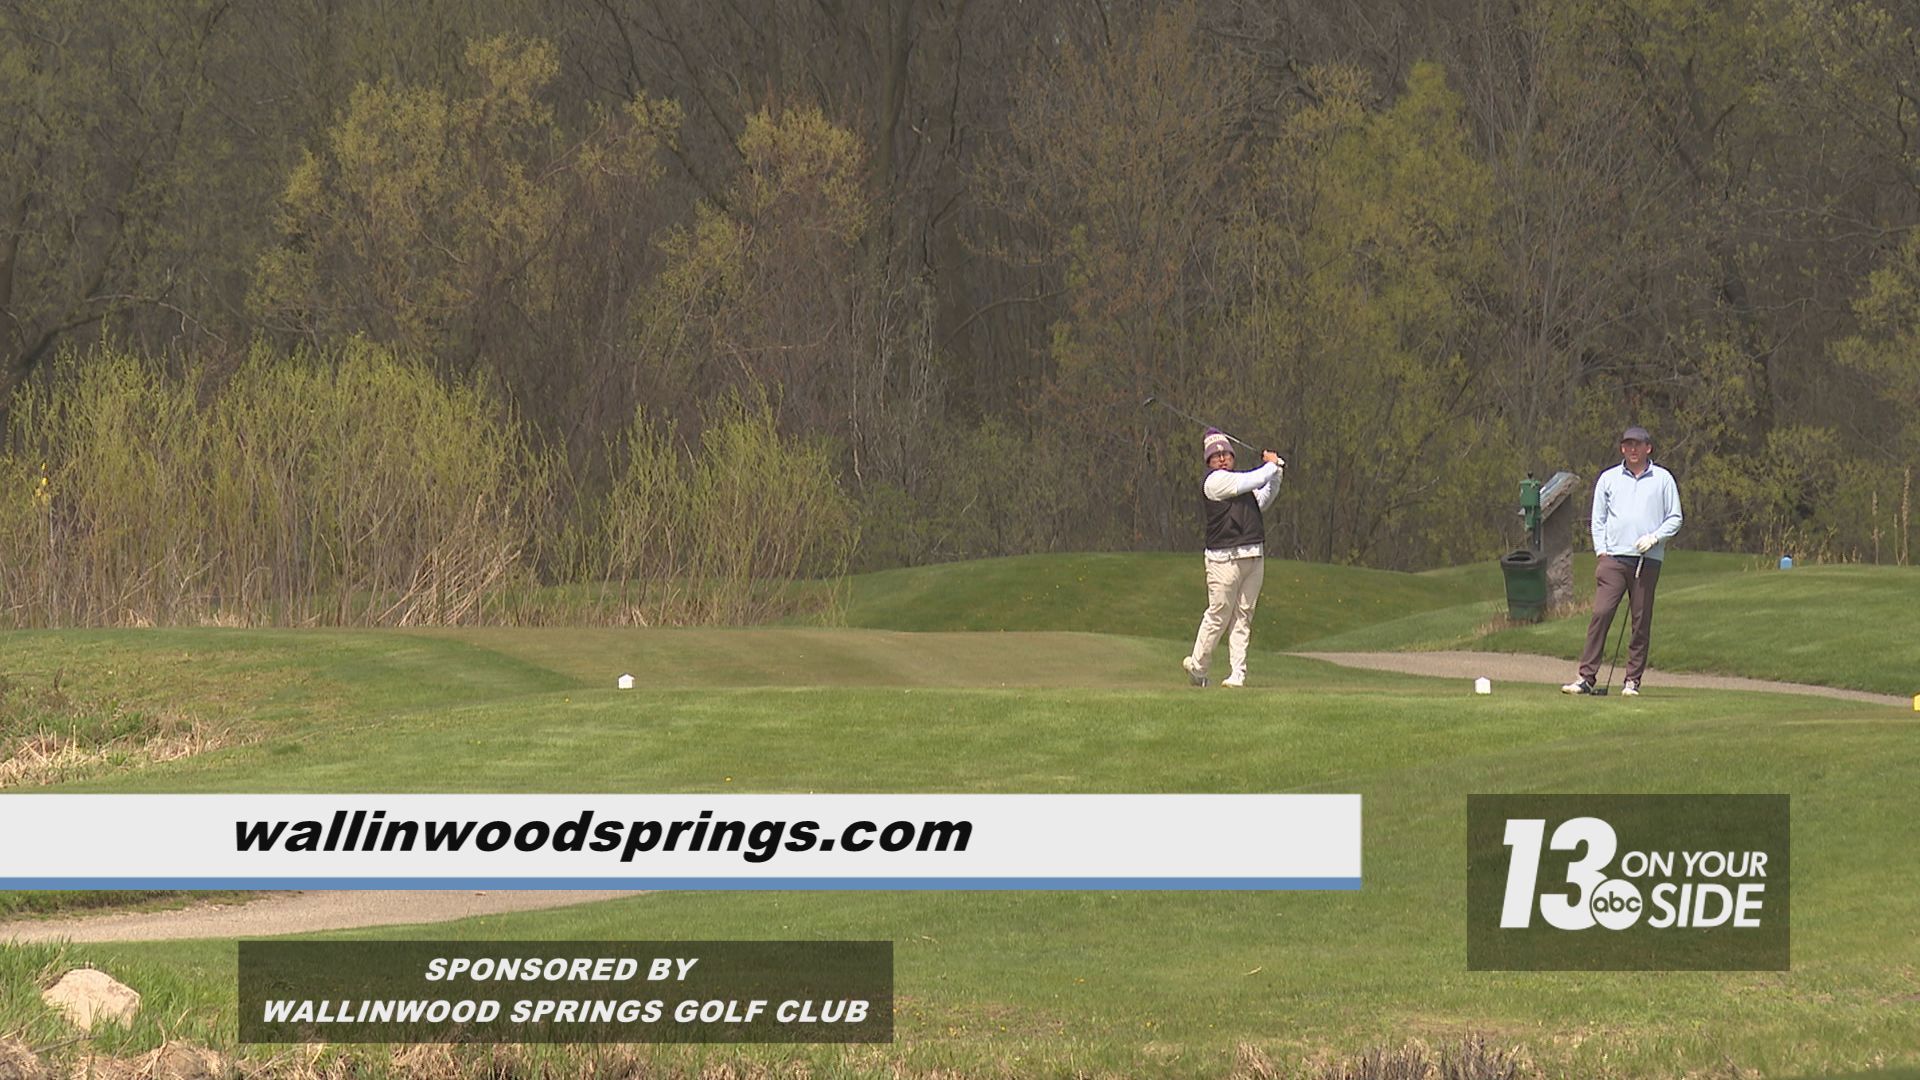 Nestled along the scenic Grand River in Jenison, Wallinwood Springs Golf Club is as challenging as it is beautiful.